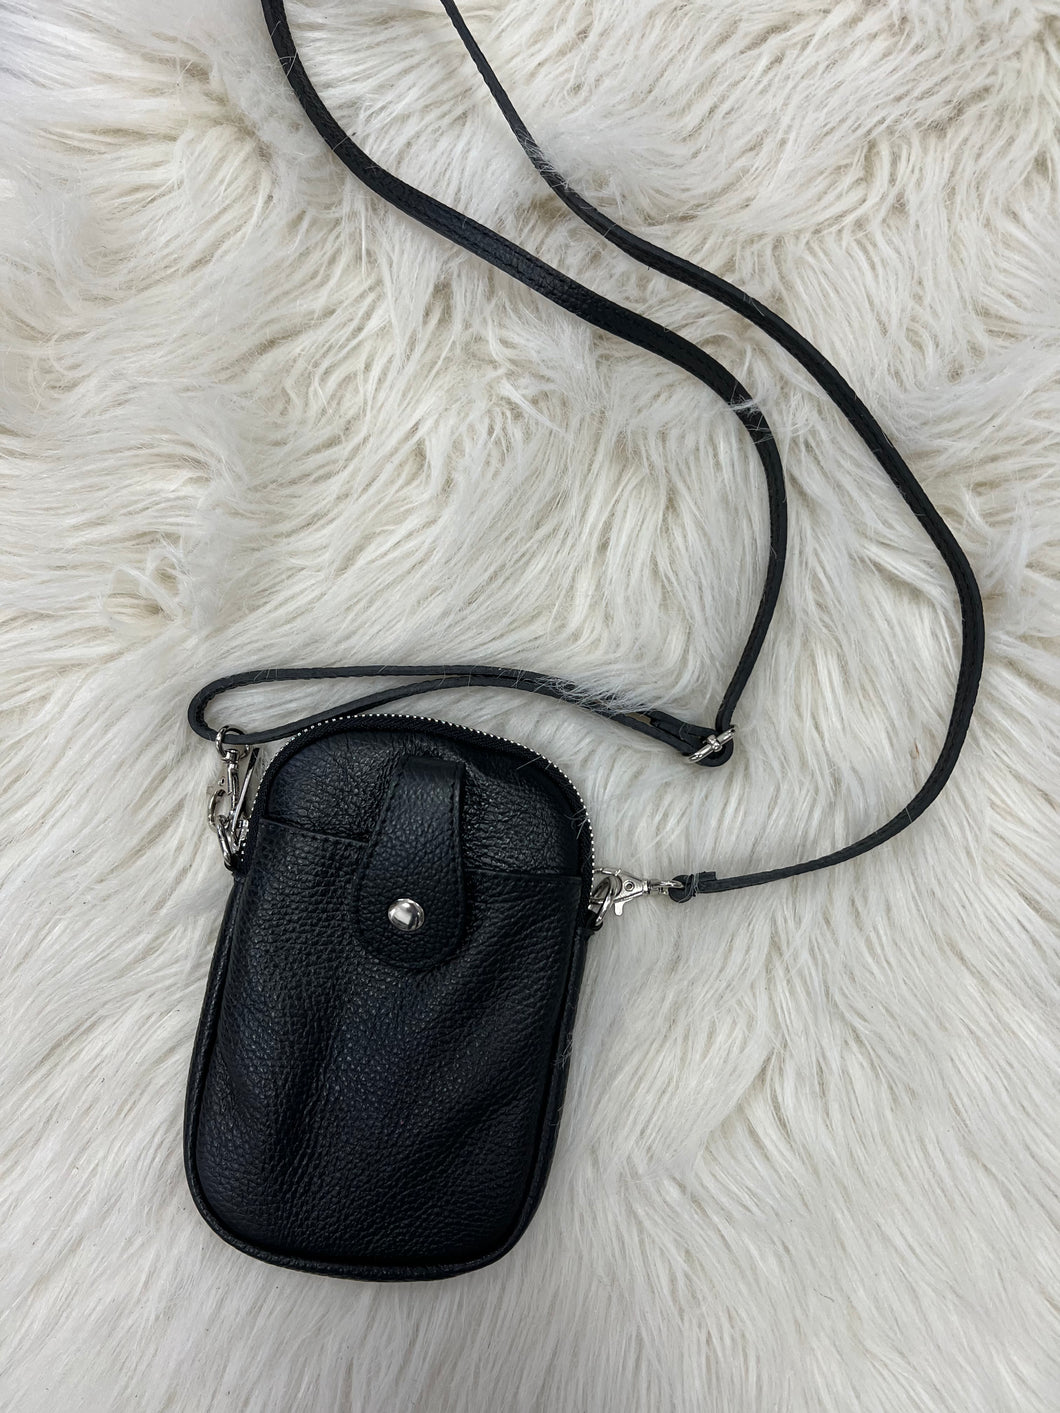 Leather Phone Pouch Bag - Black